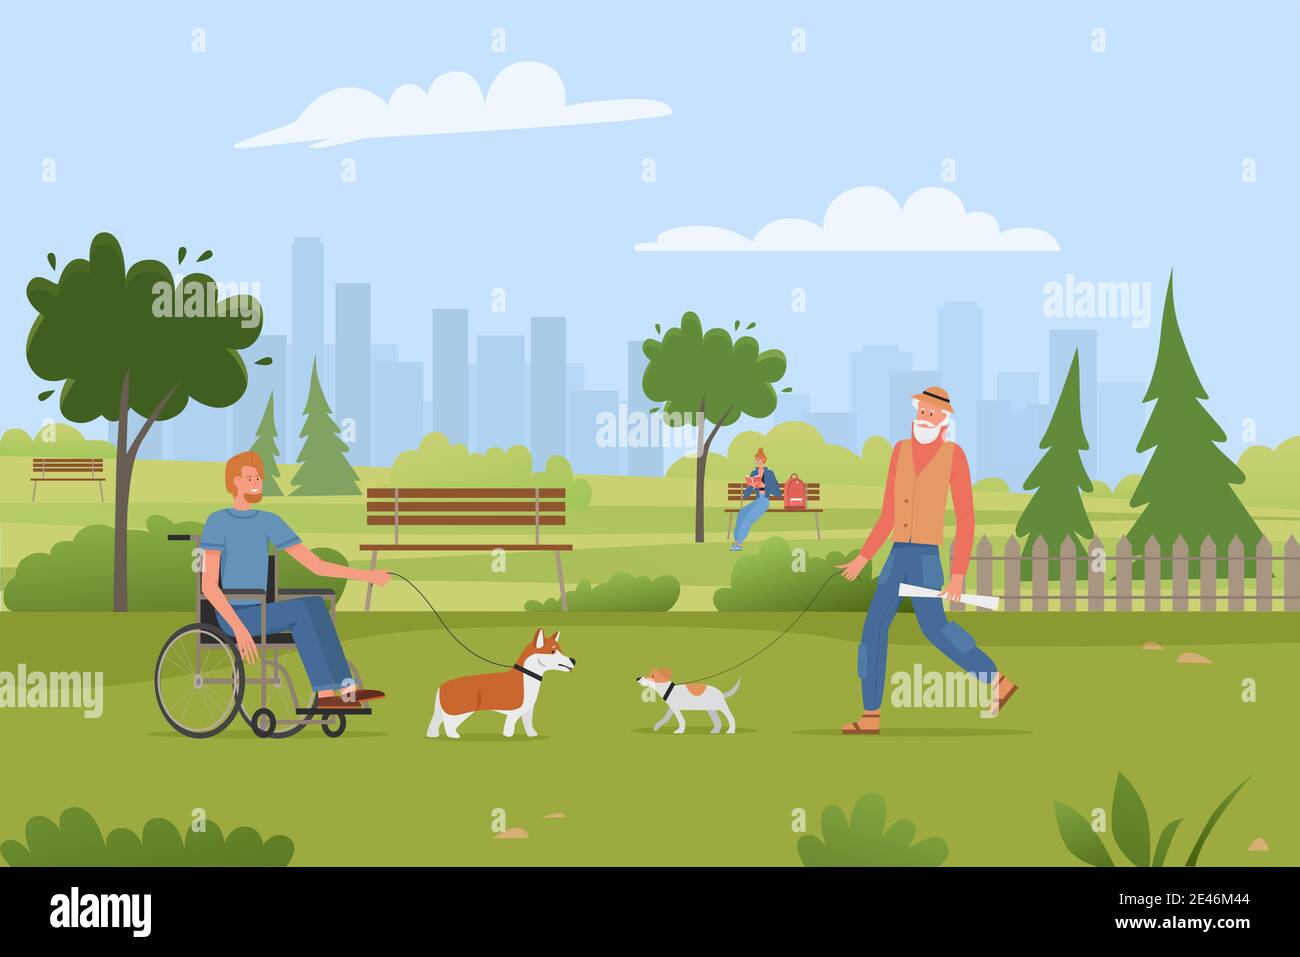 People walk with pets dogs in summer city park vector illustration. Cartoon disabled man in wheelchair and elderly senior character walking with doggy animals, urban park cityscape scene background Stock Vector